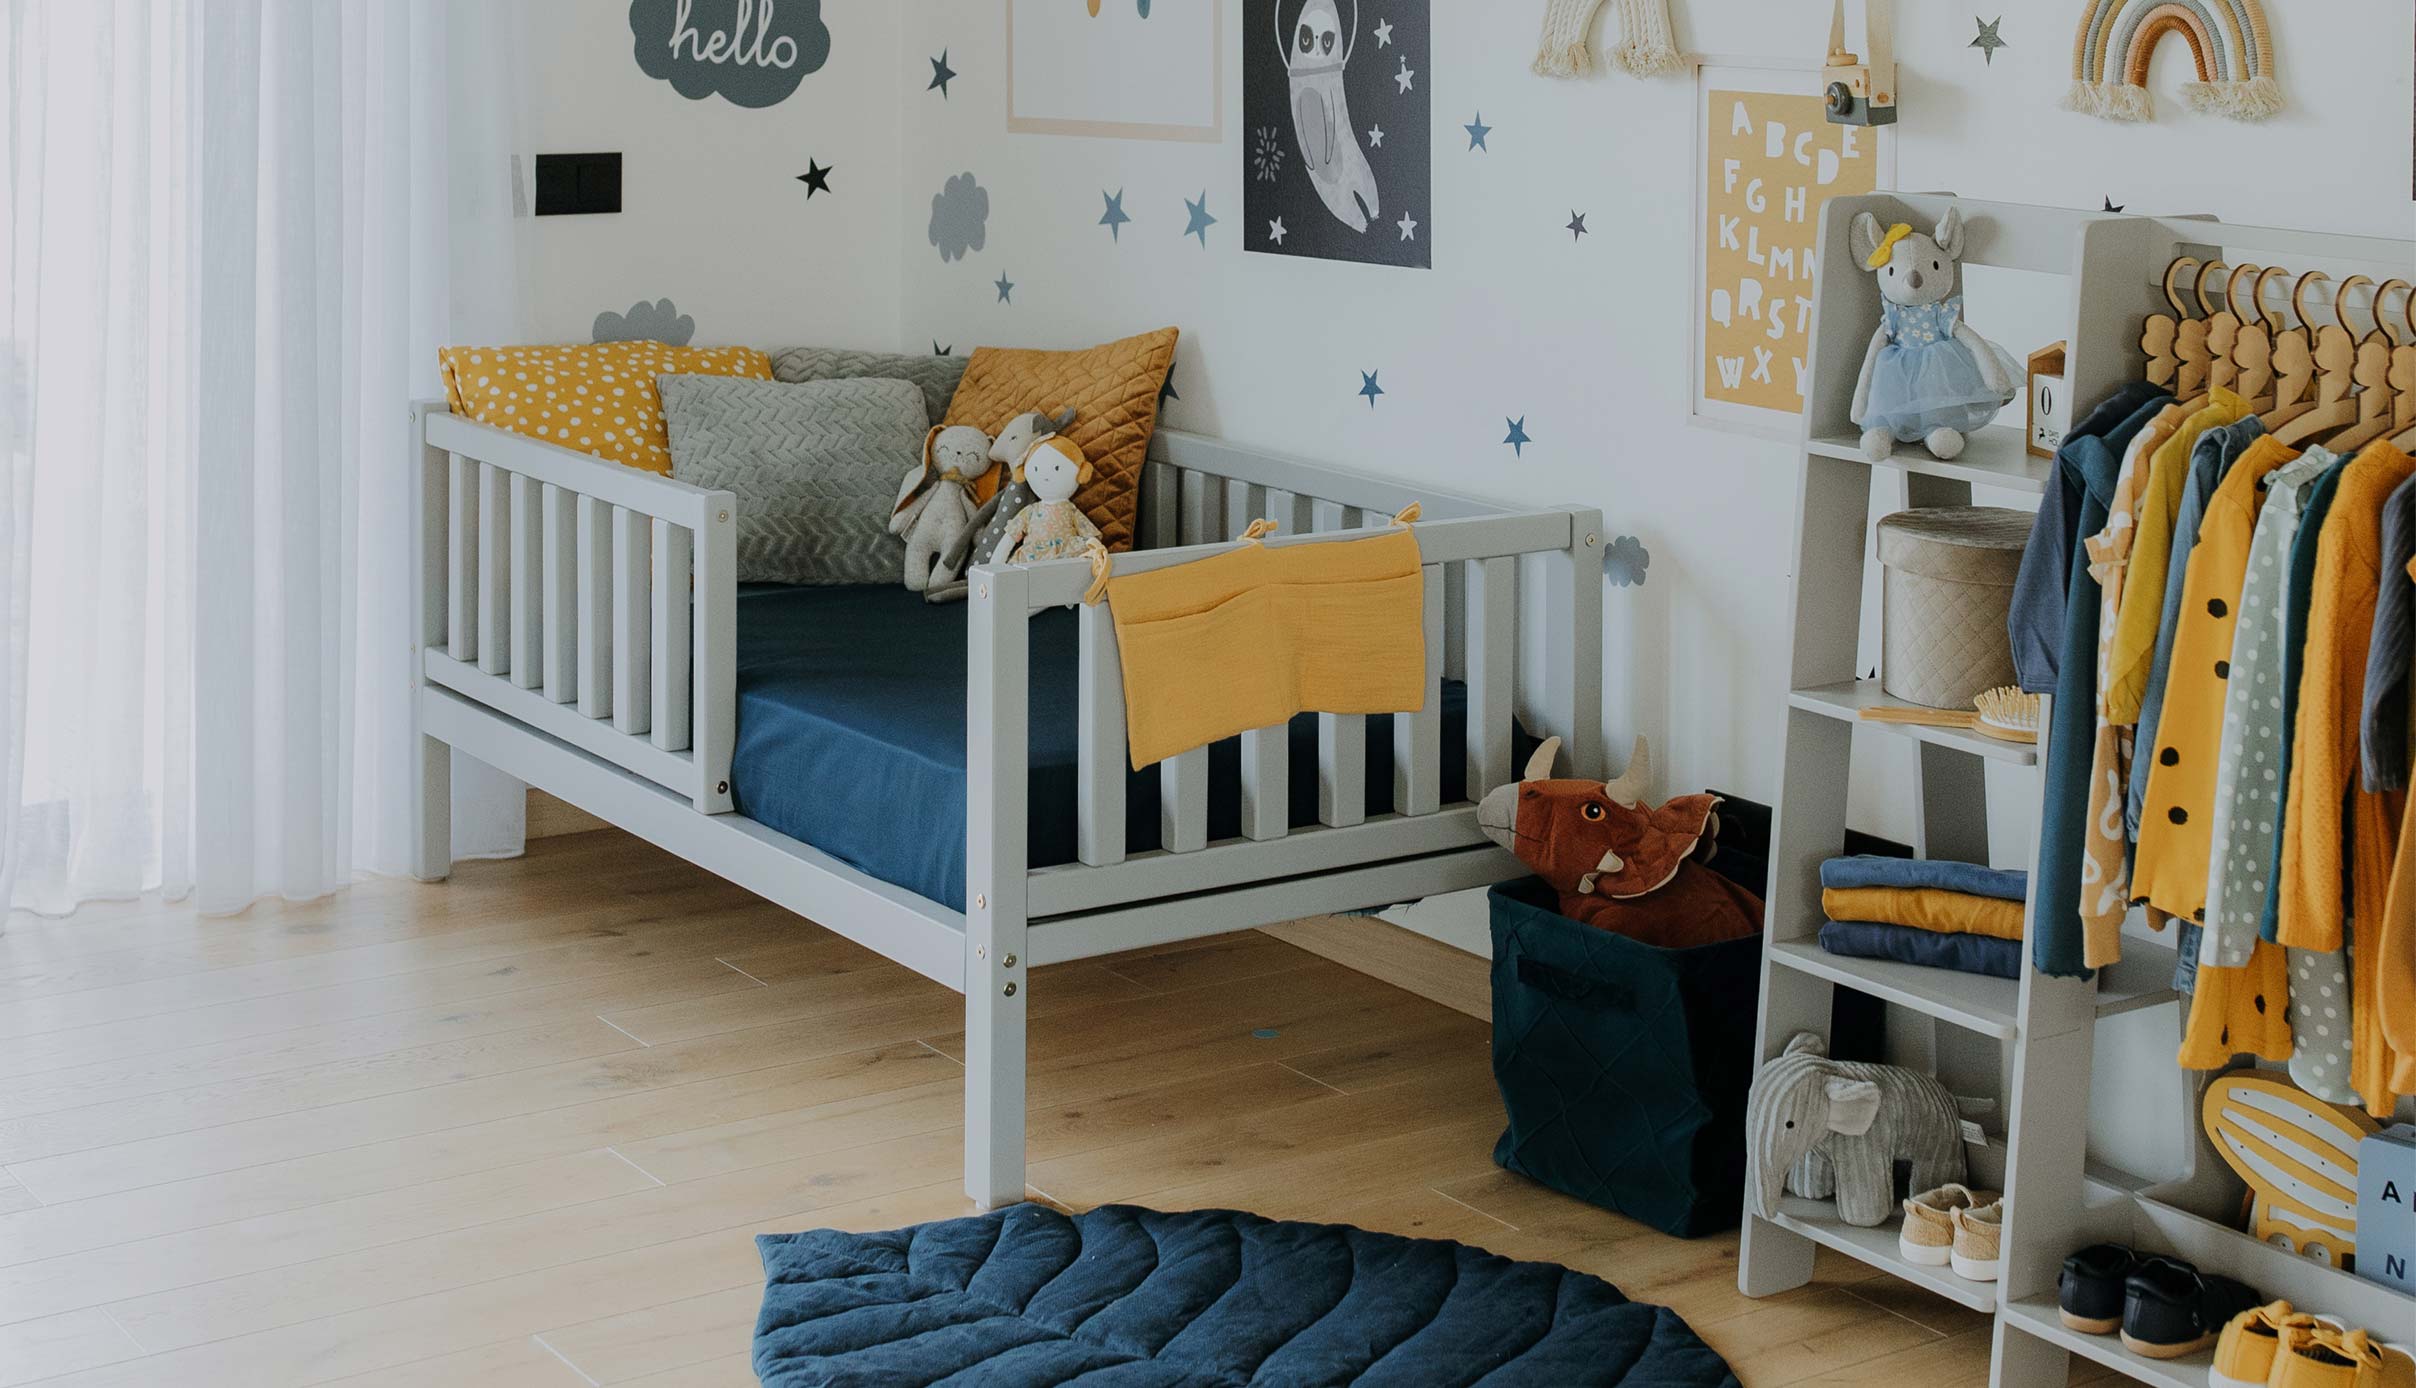 A baby's room with yellow and blue decor.